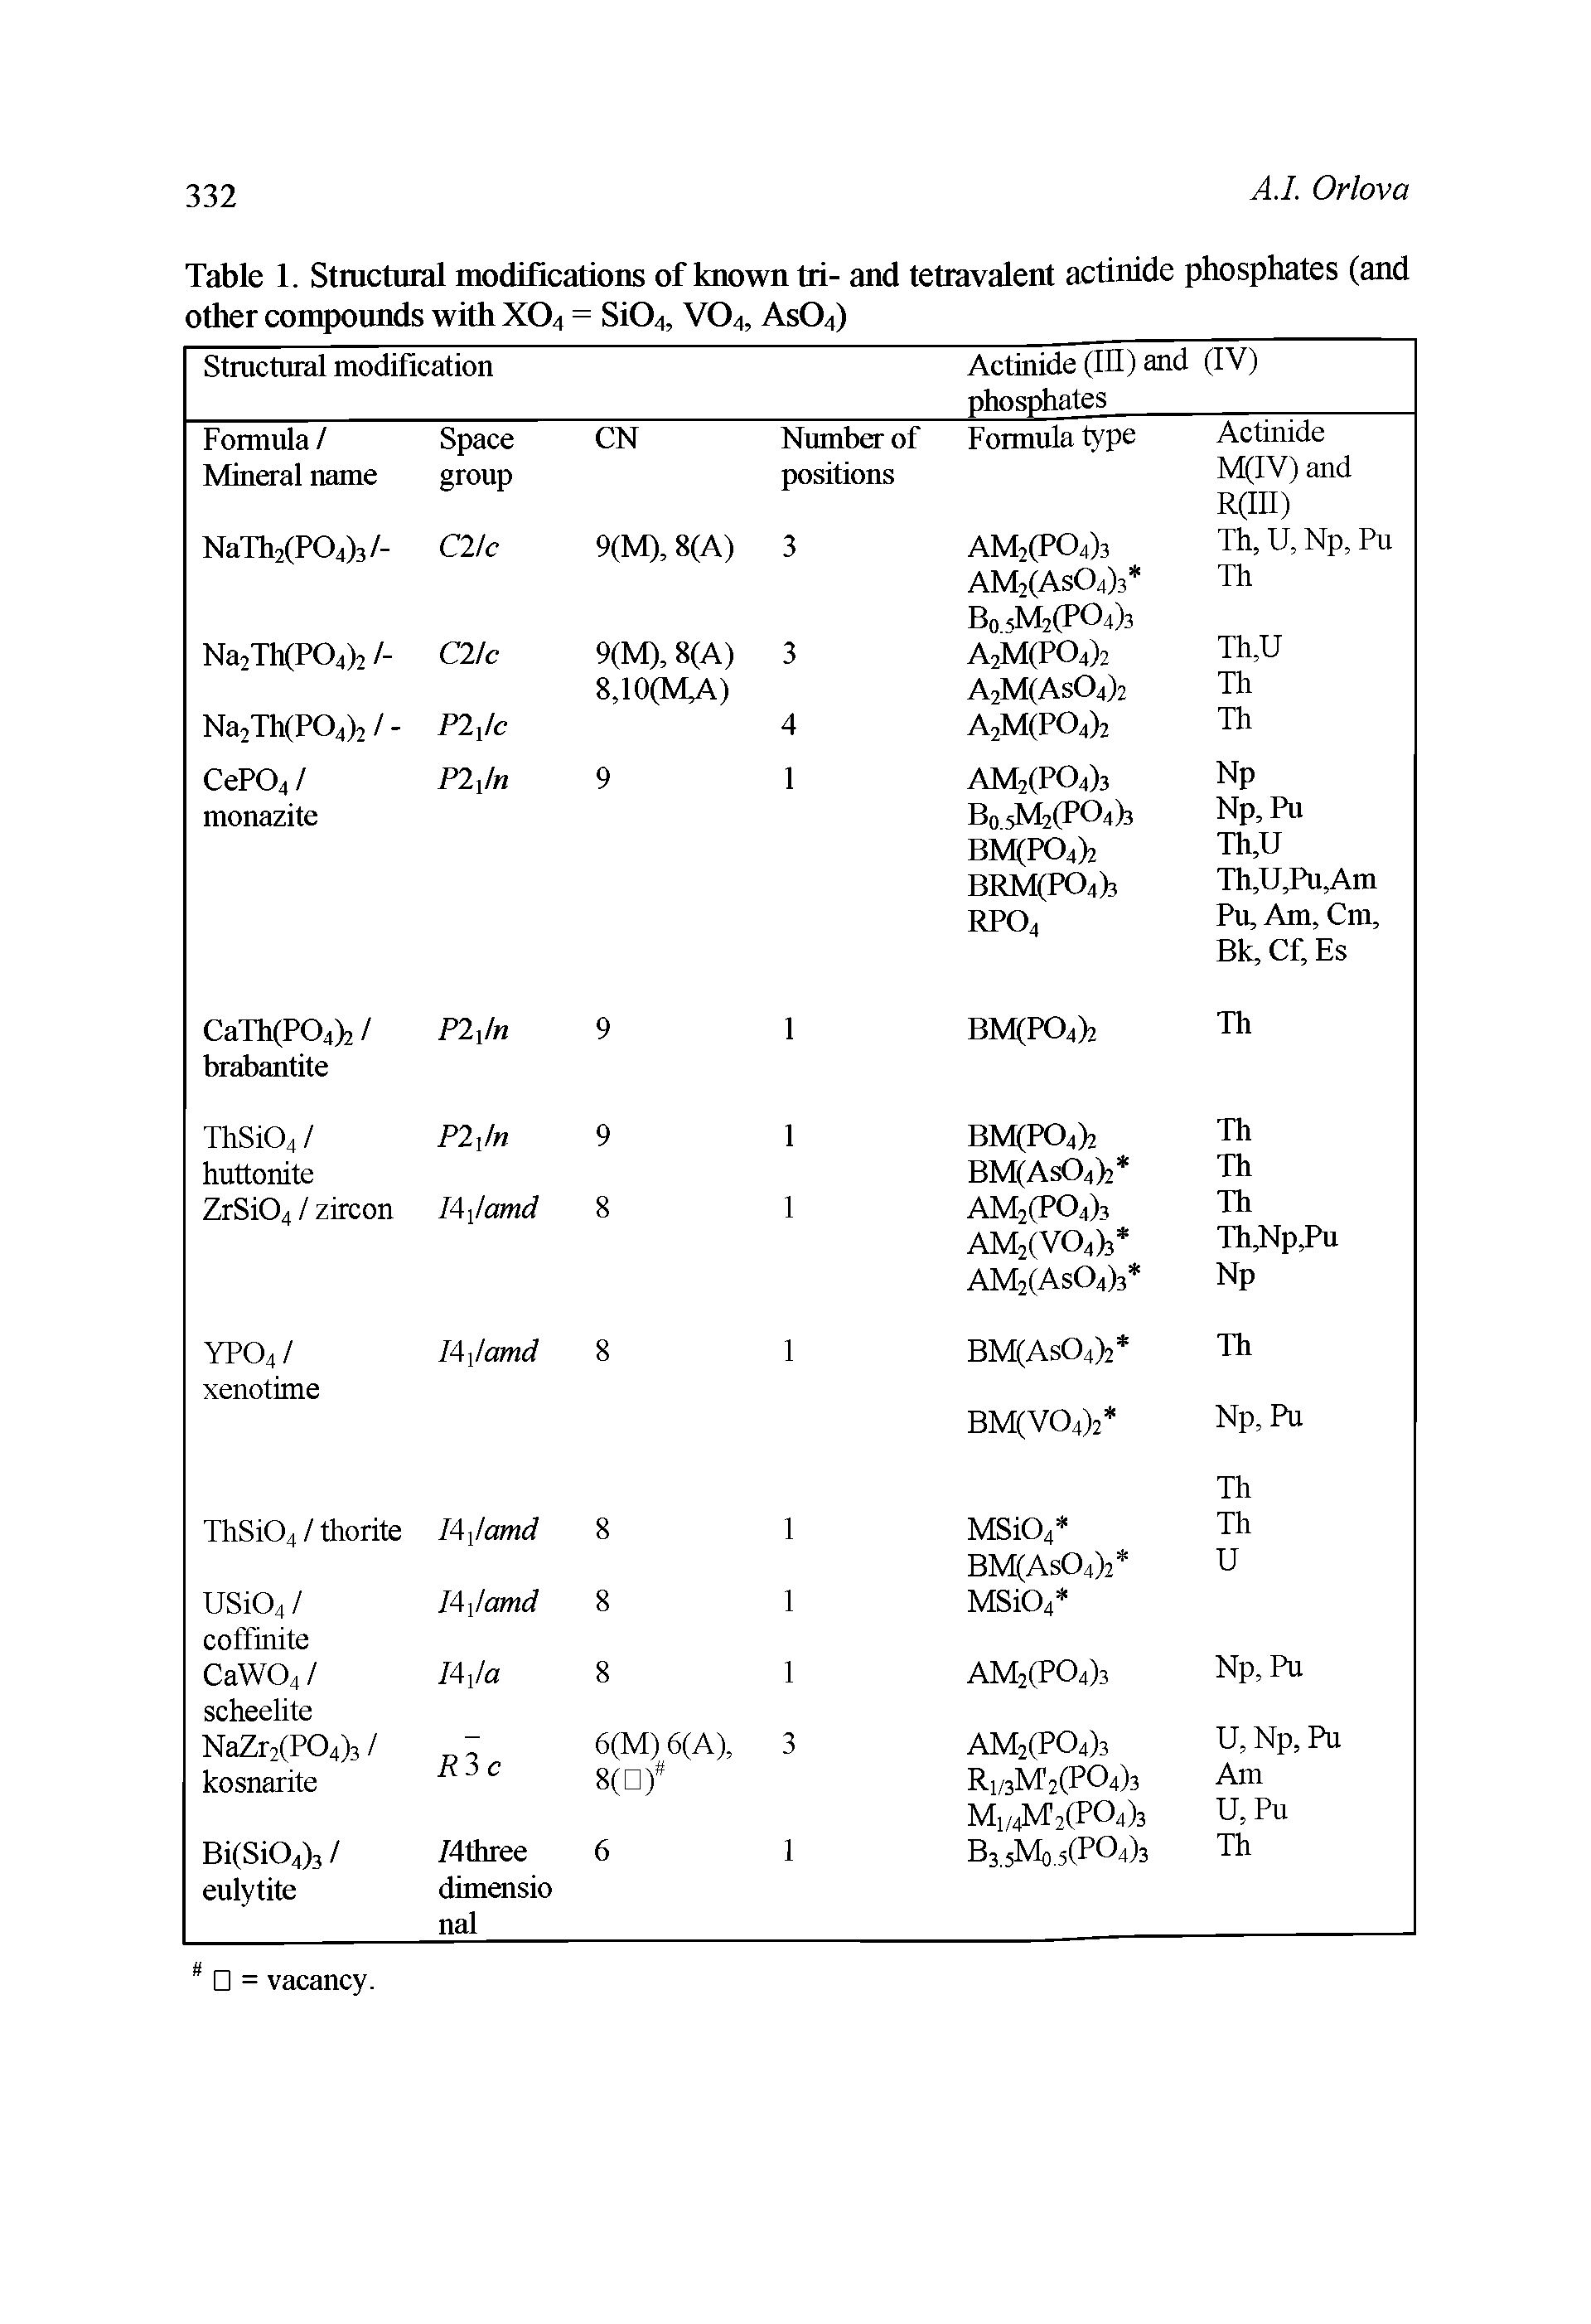 Table 1. Stractural modifications of known tri- and tetravalent actinide phosphates (and other compounds with XO4 = Si04, VO4, ASO4)...